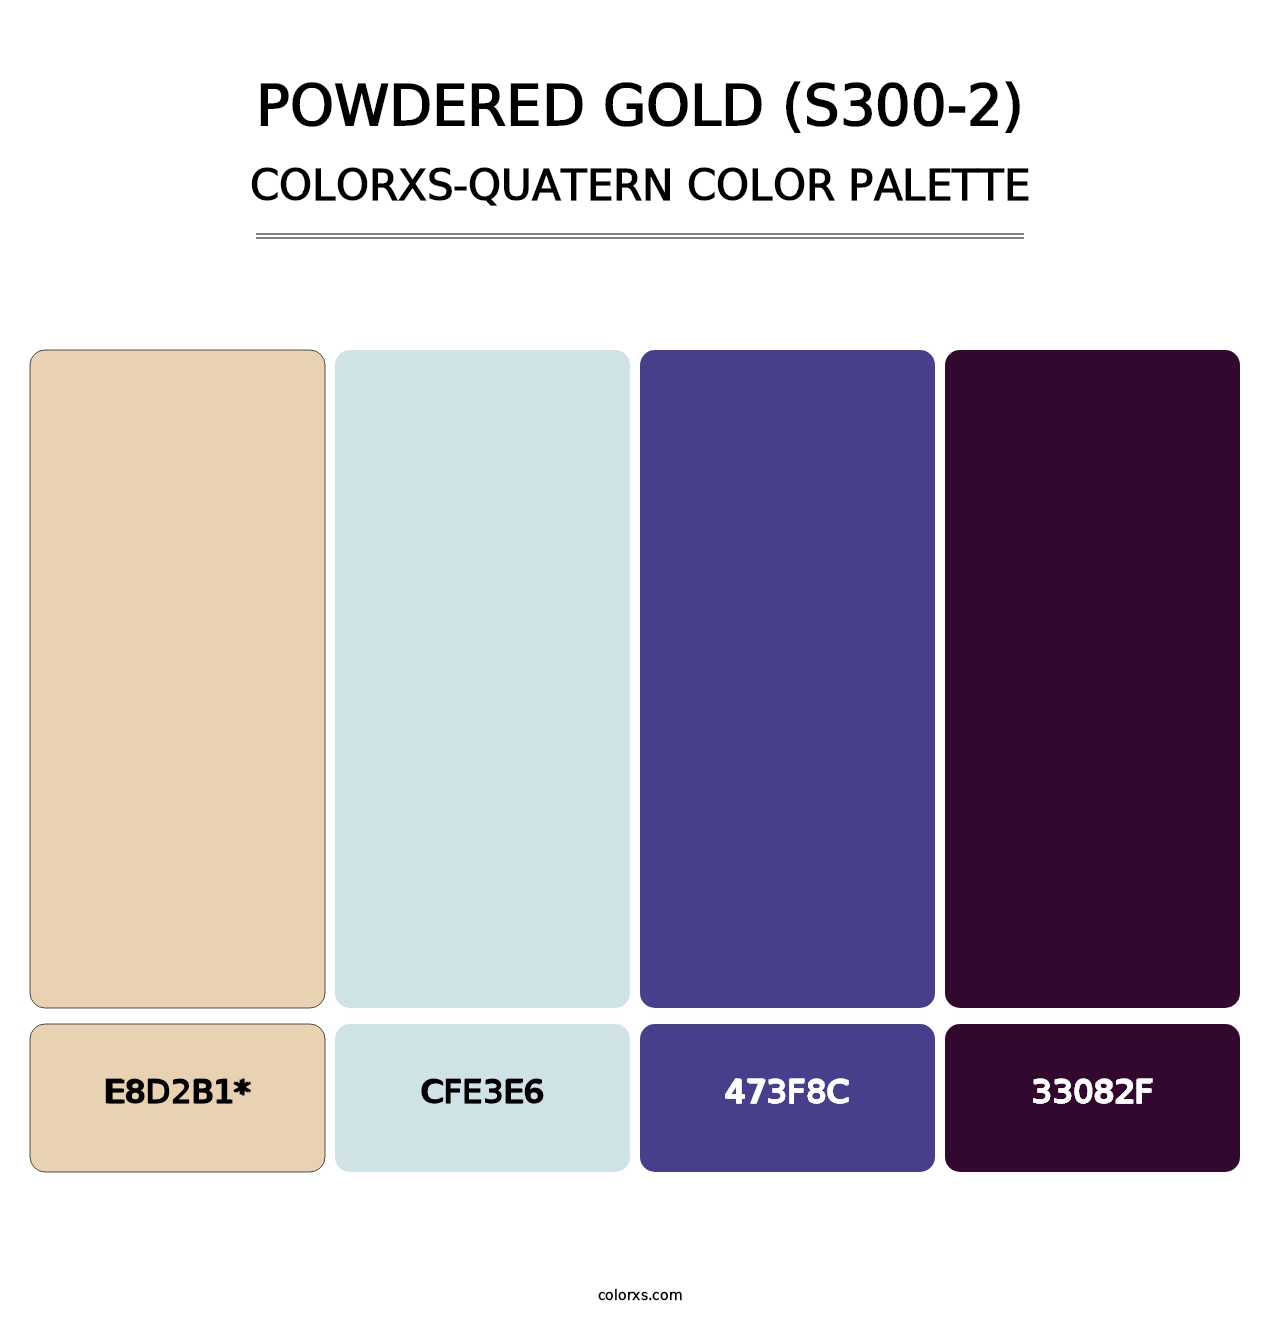 Powdered Gold (S300-2) - Colorxs Quatern Palette